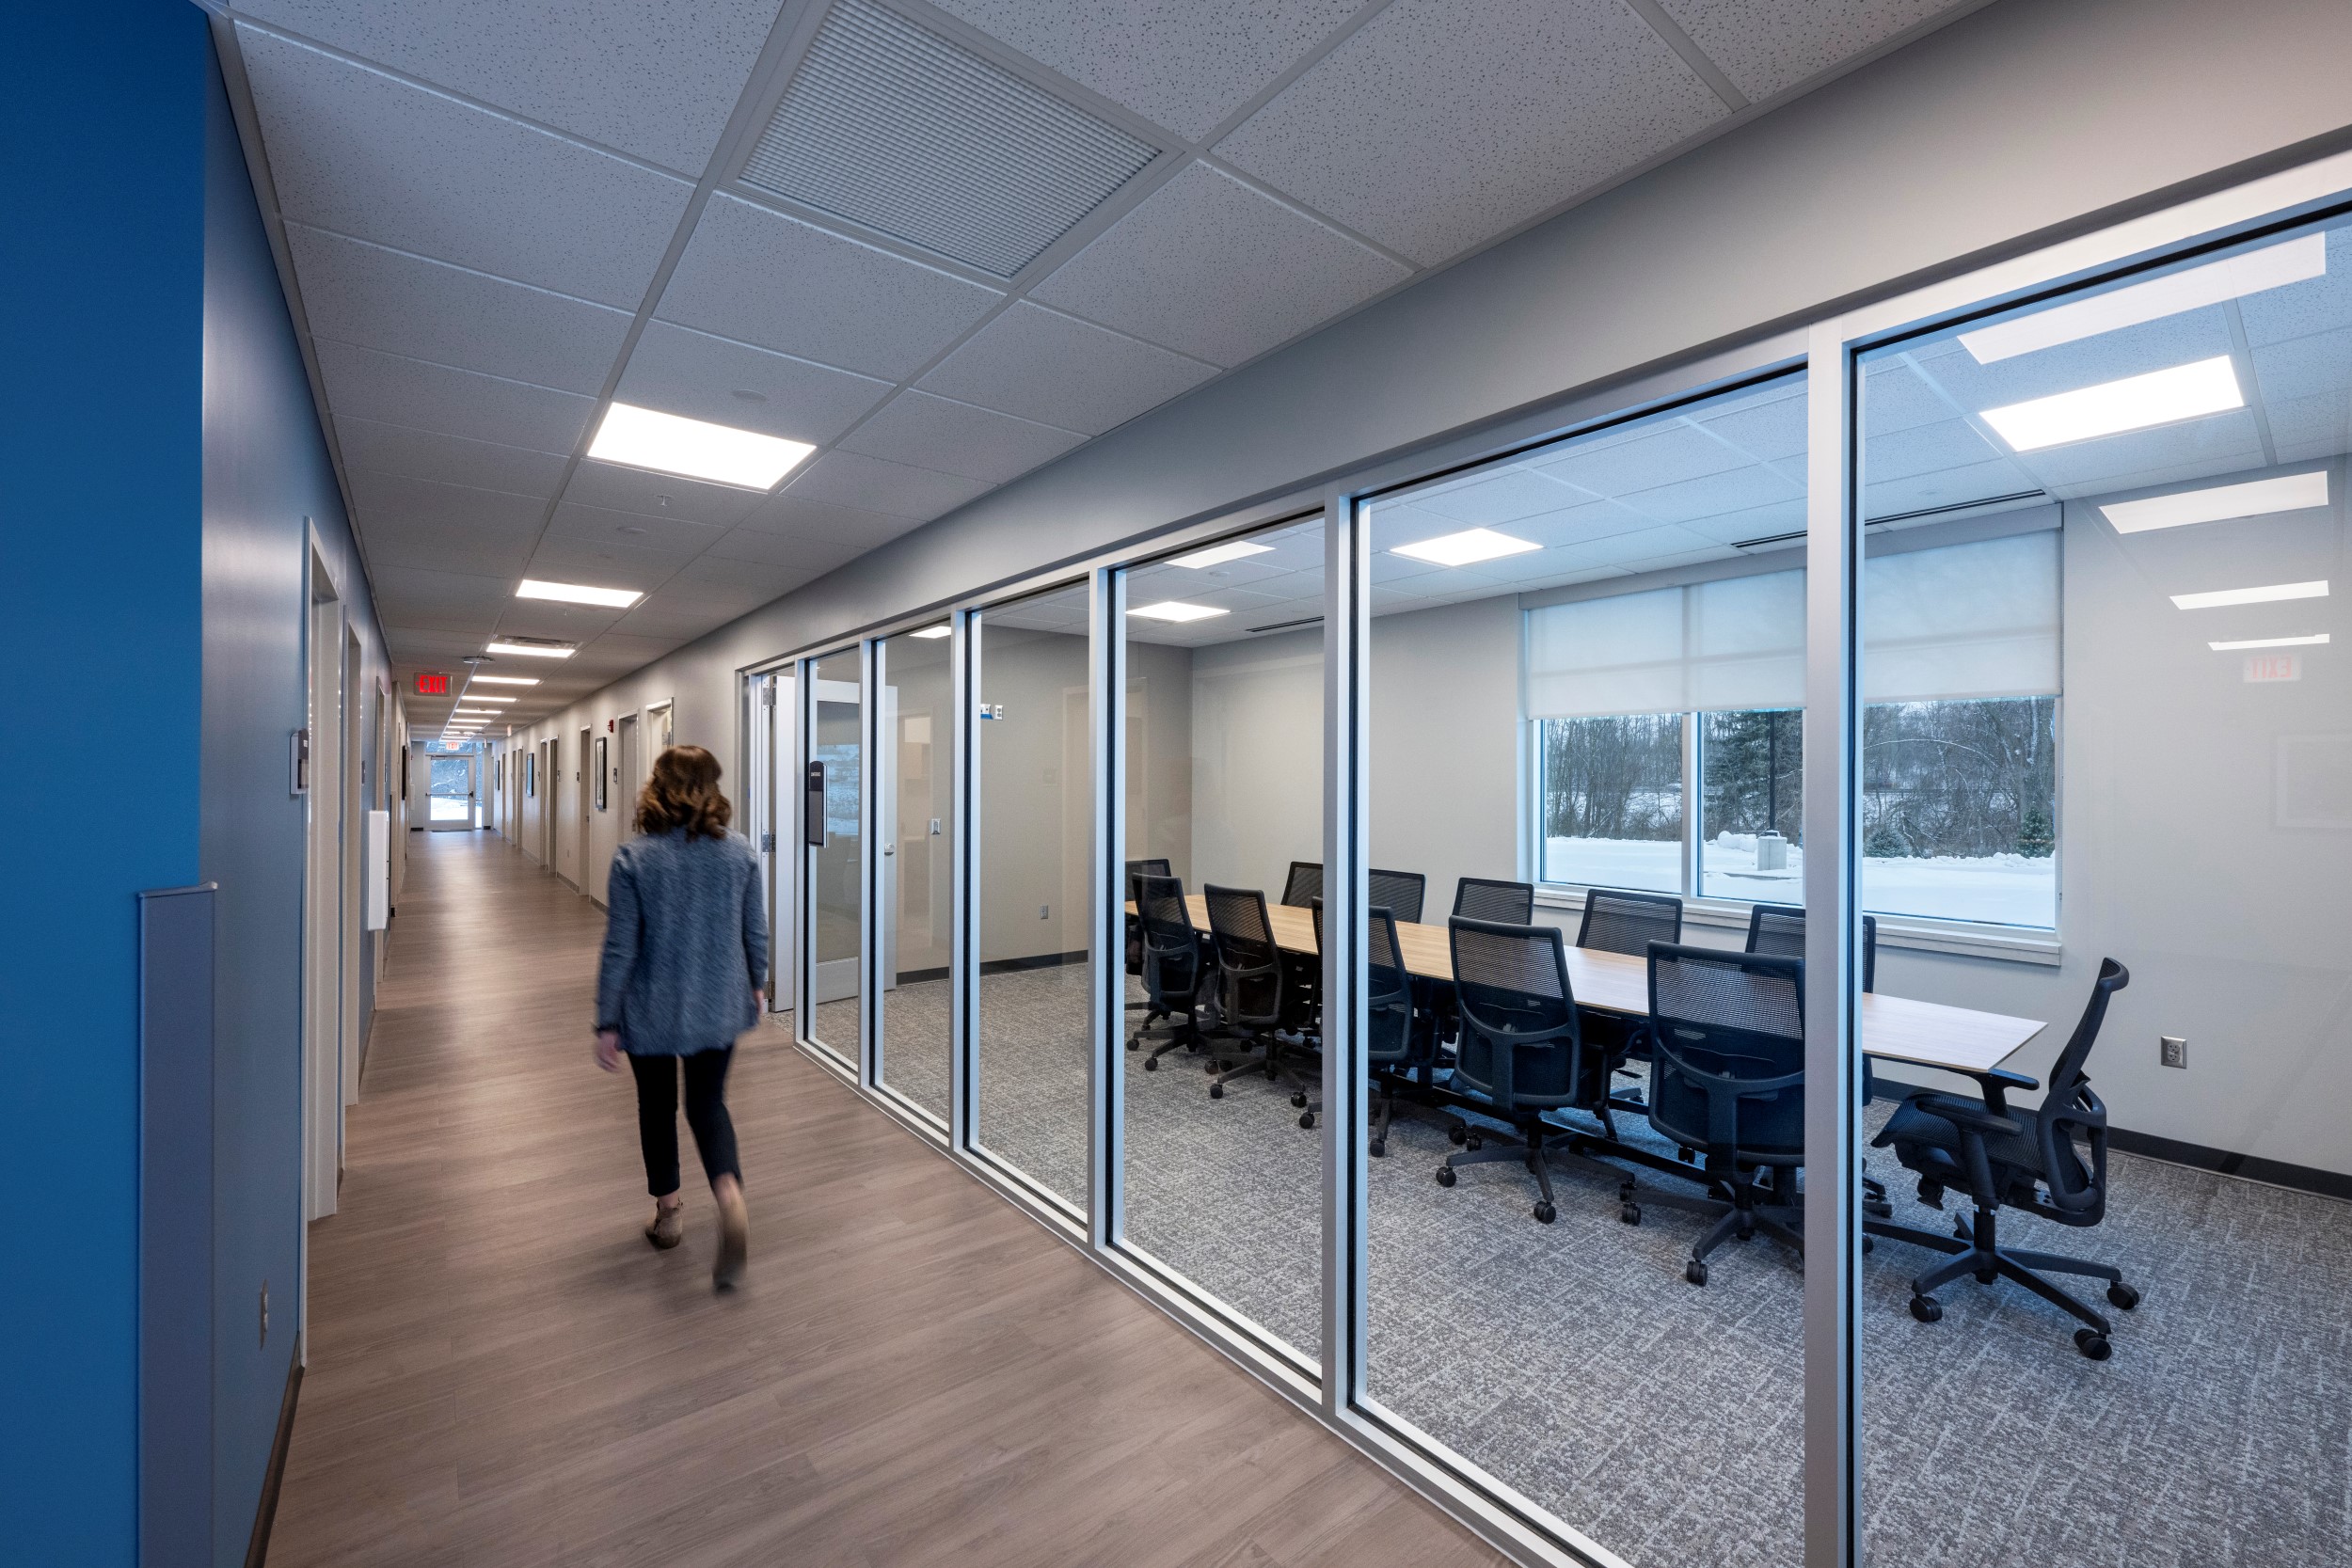 Bowen Health conference room and hallway with person walking